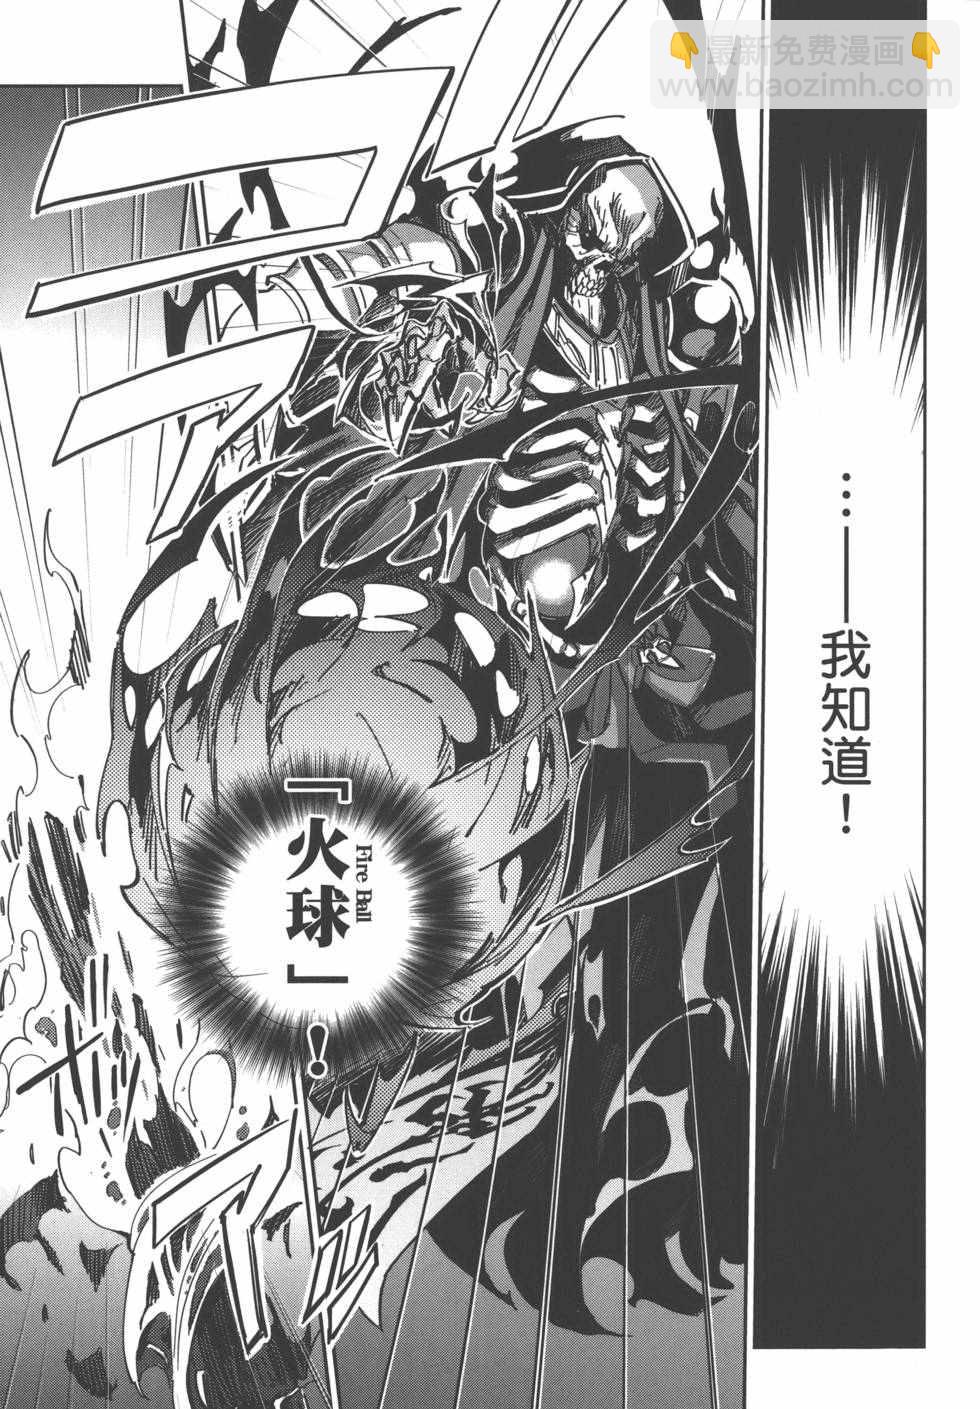 OVERLORD - 第1卷(1/4) - 7